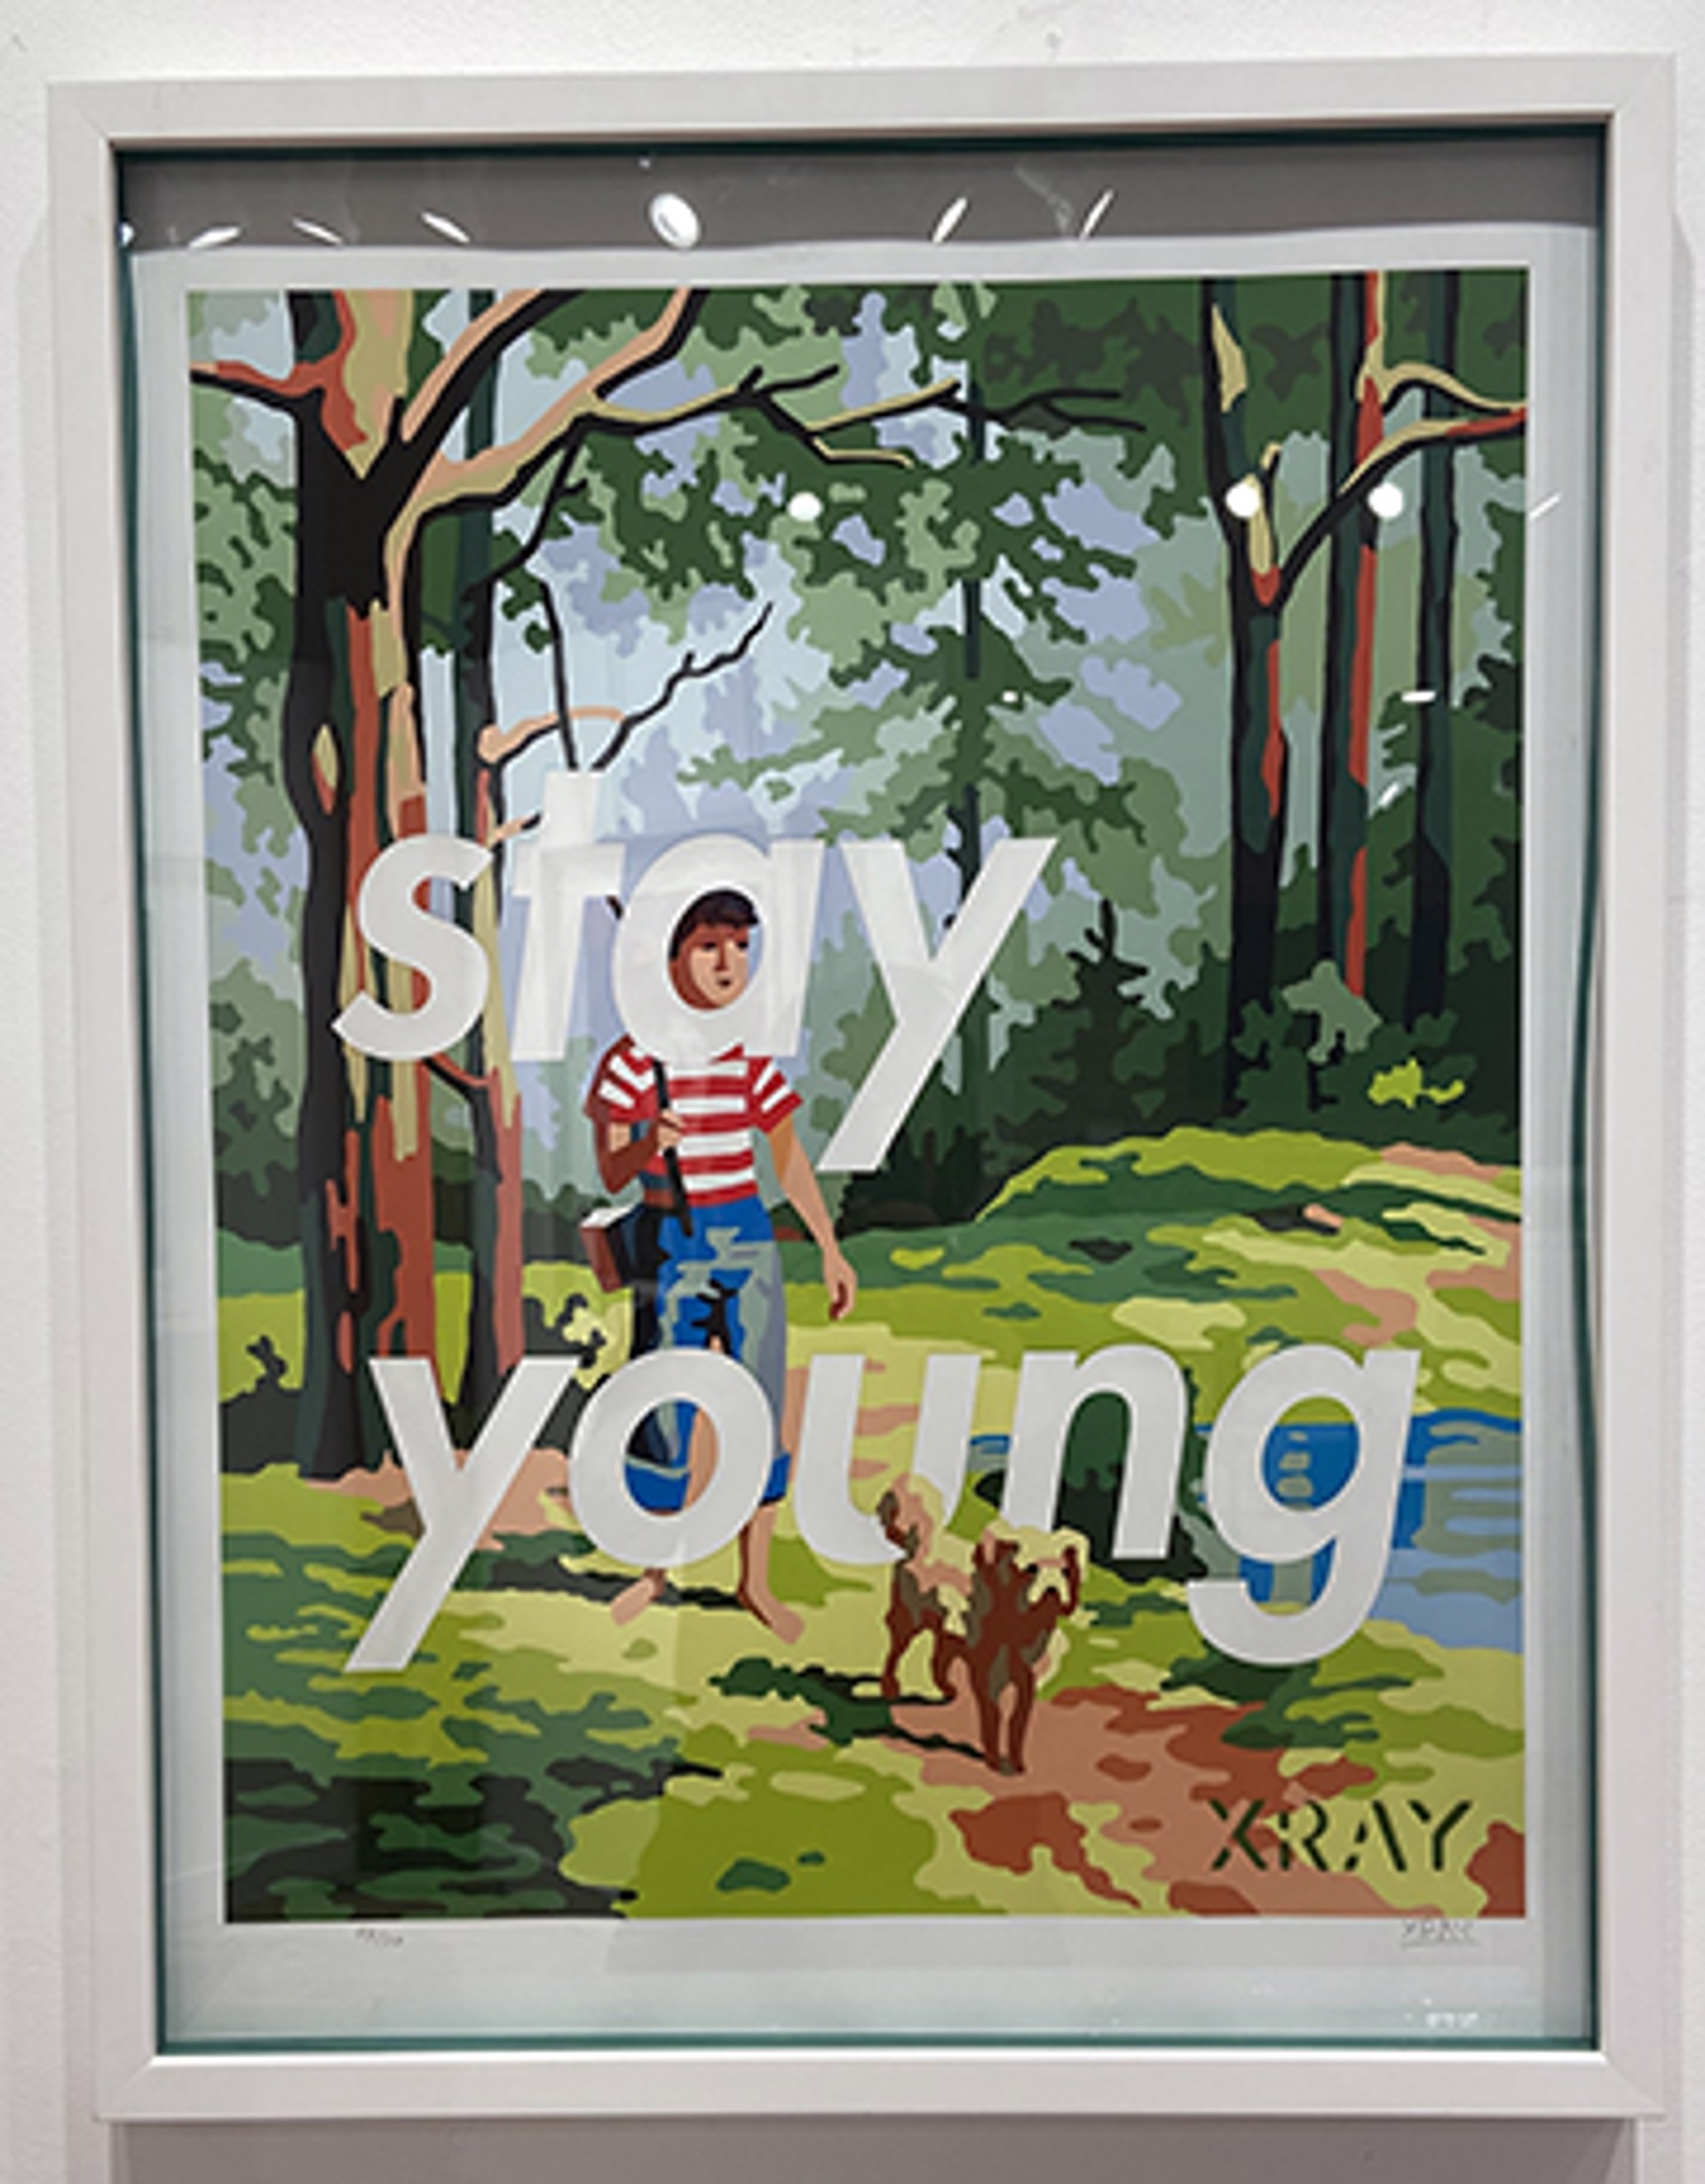 Stay Young by XRAY